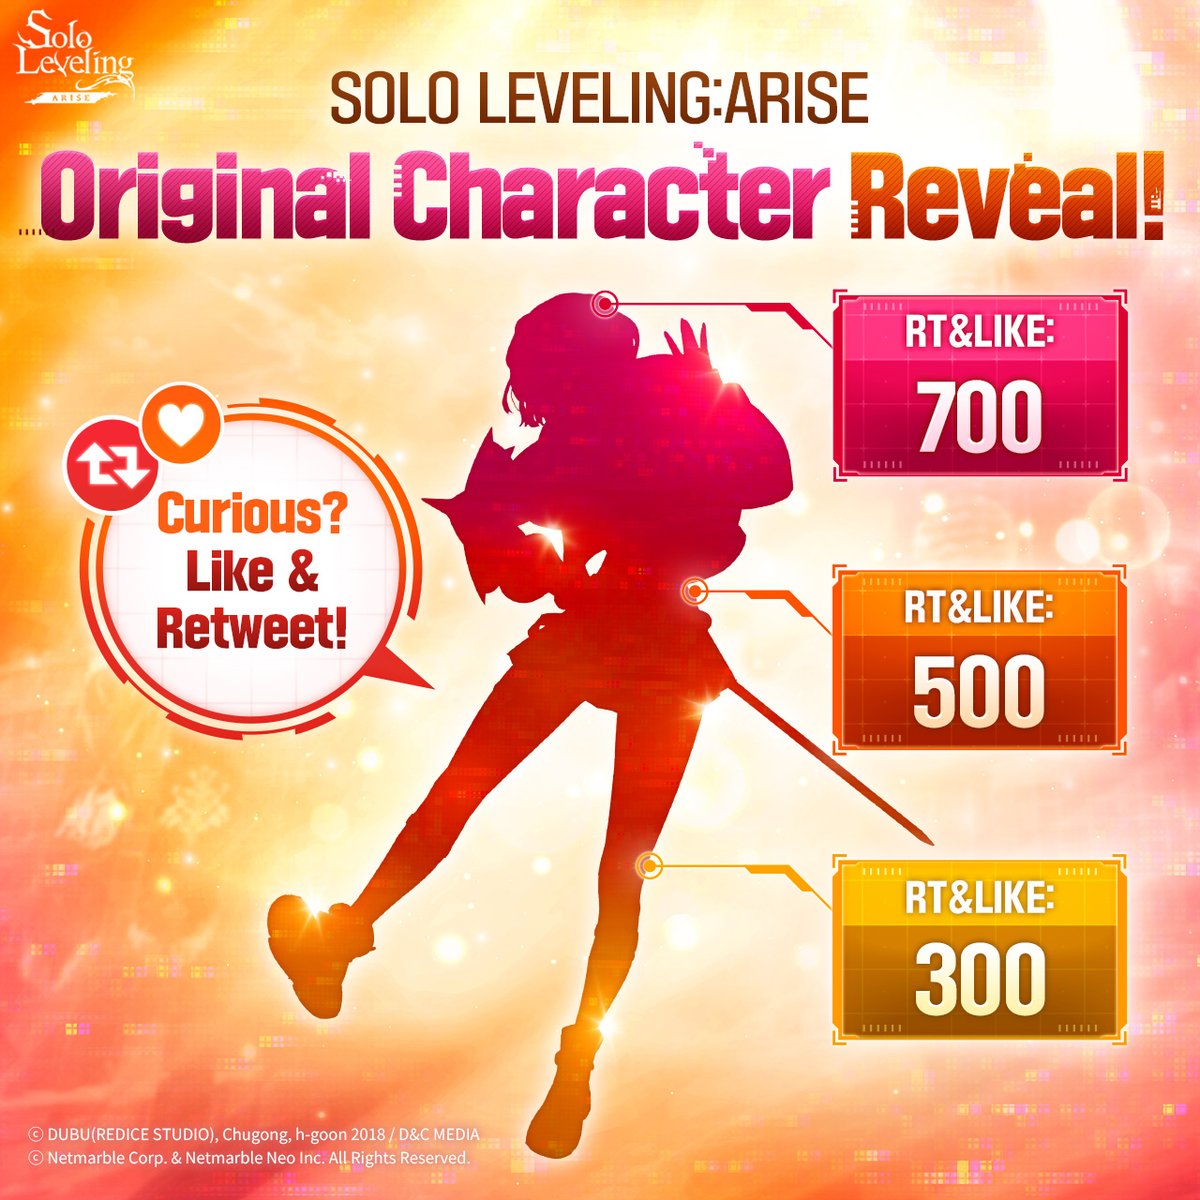 Solo Leveling:ARISE #OriginalCharacter scheduled for first reveal!✨ Doesn't the silhouette alone arouse curiosity? If you want to see the full image, please like & retweet! ❤♻ We'll reveal the character once total likes and retweets surpass 700! #sololevelingARISE